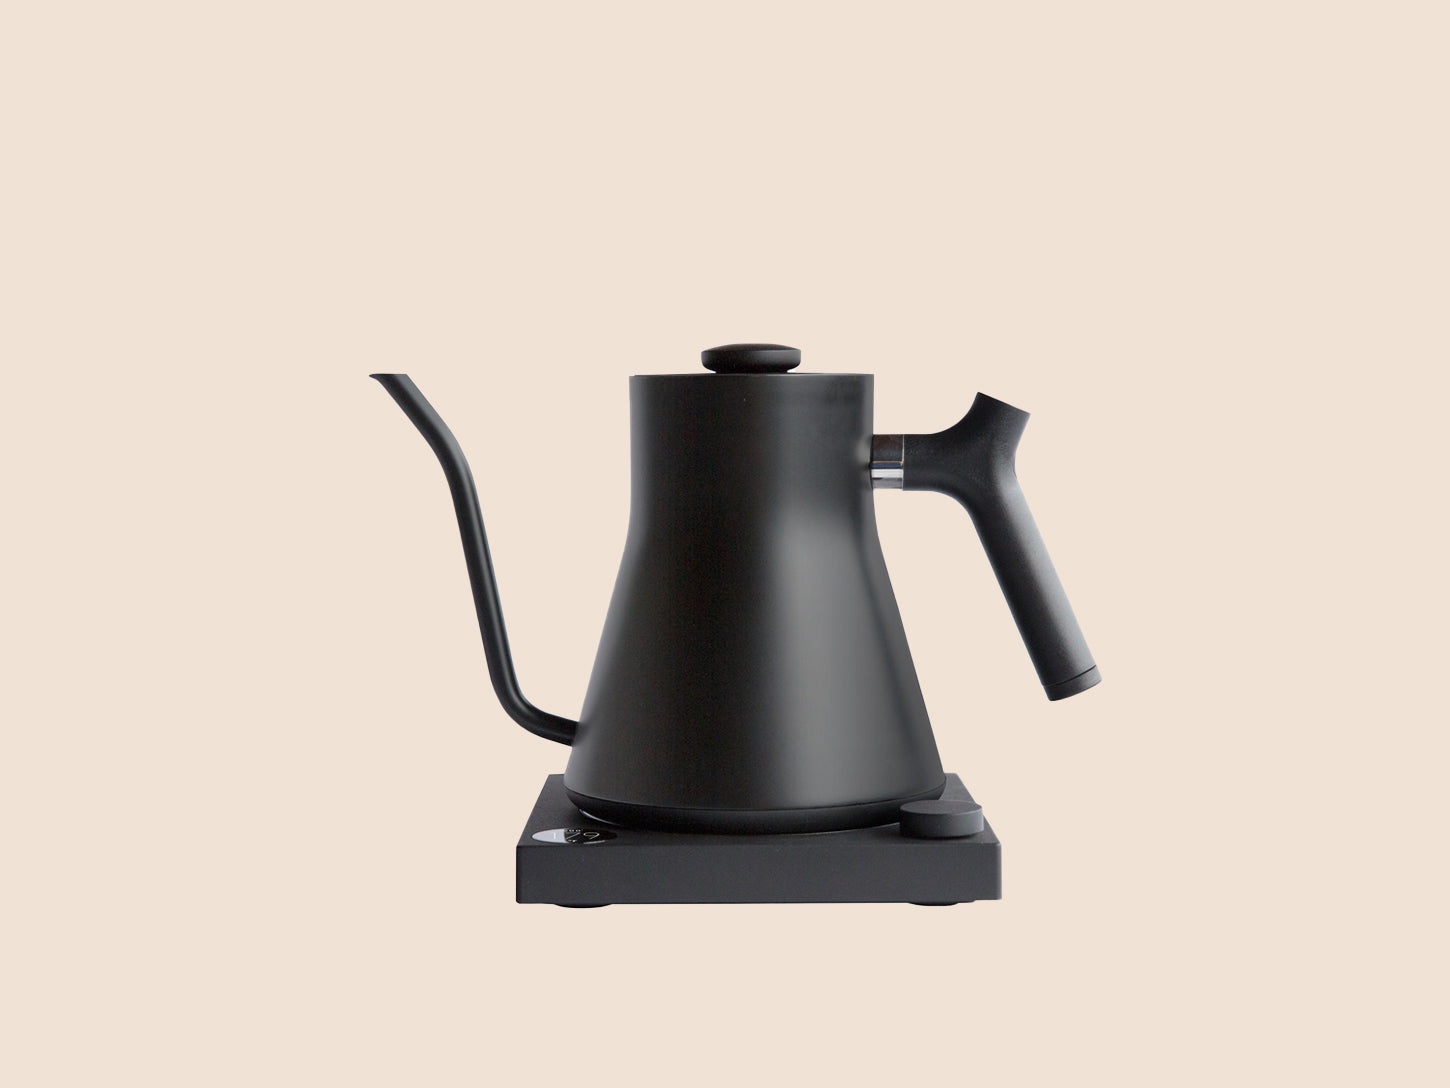 MIGHTY SMALL GLASS CARAFE - Shop Fellow Products Coffee Pots